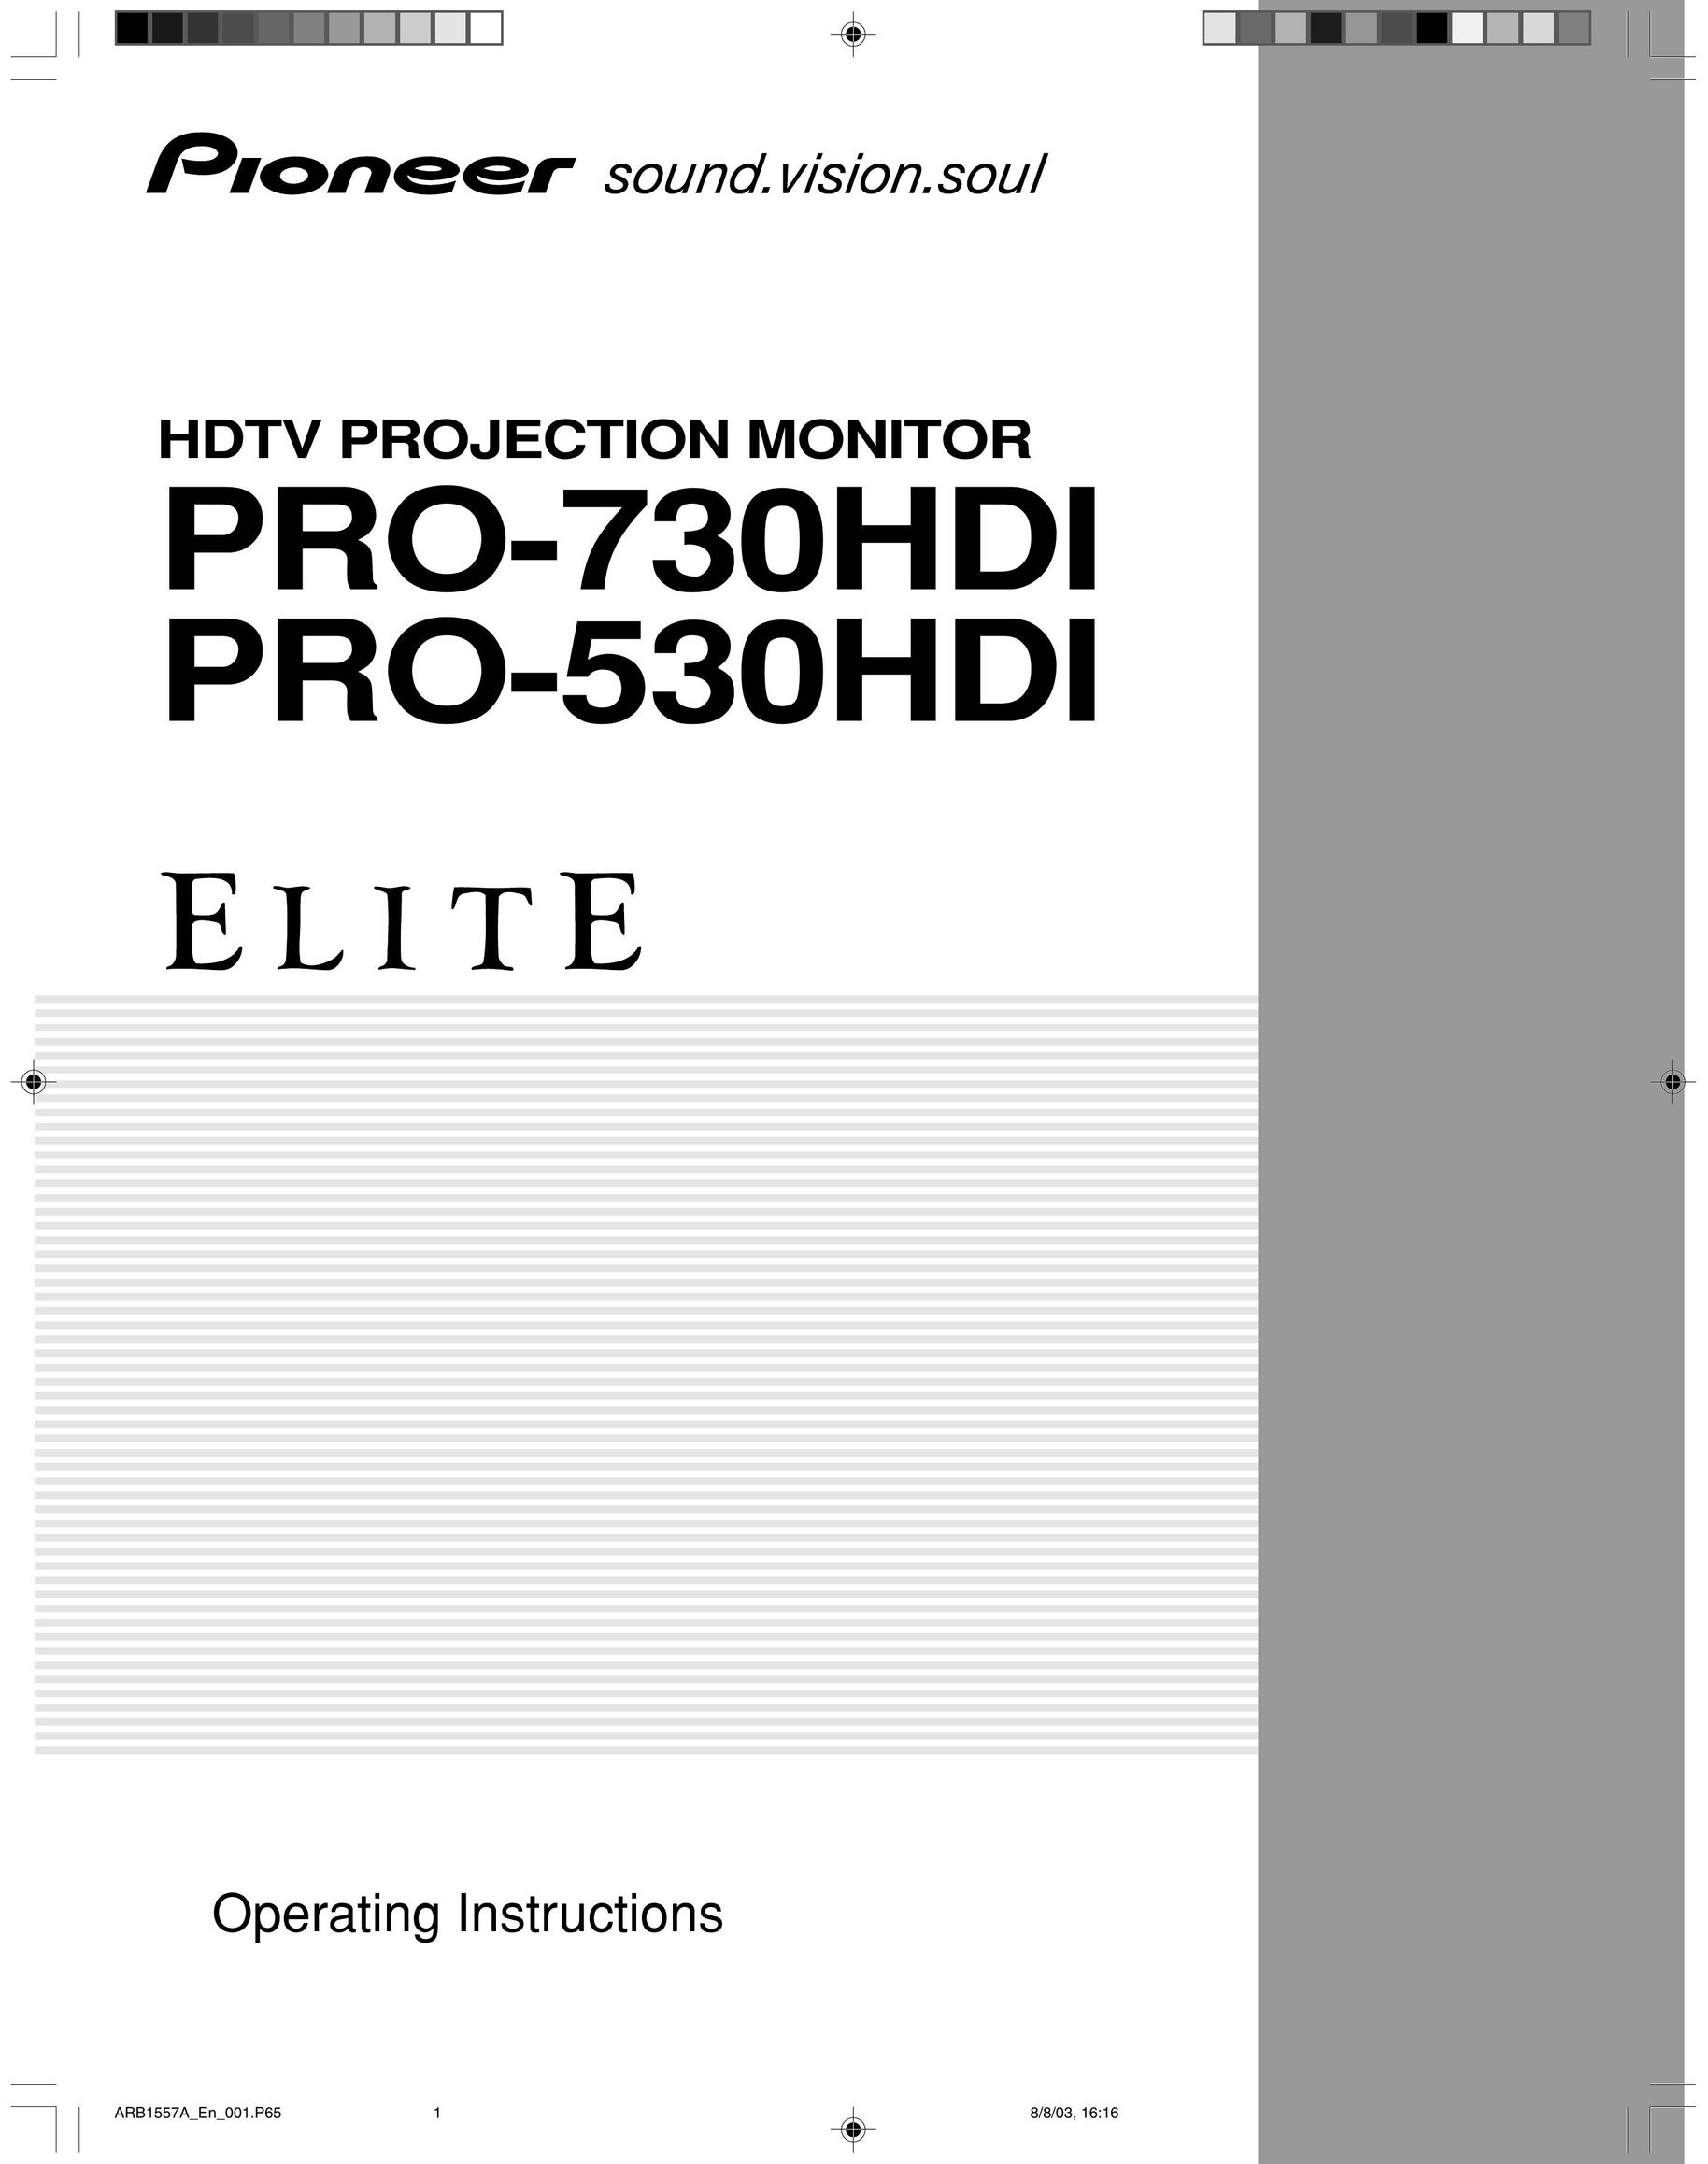 Pioneer PRO-530HDI Projection Television User Manual